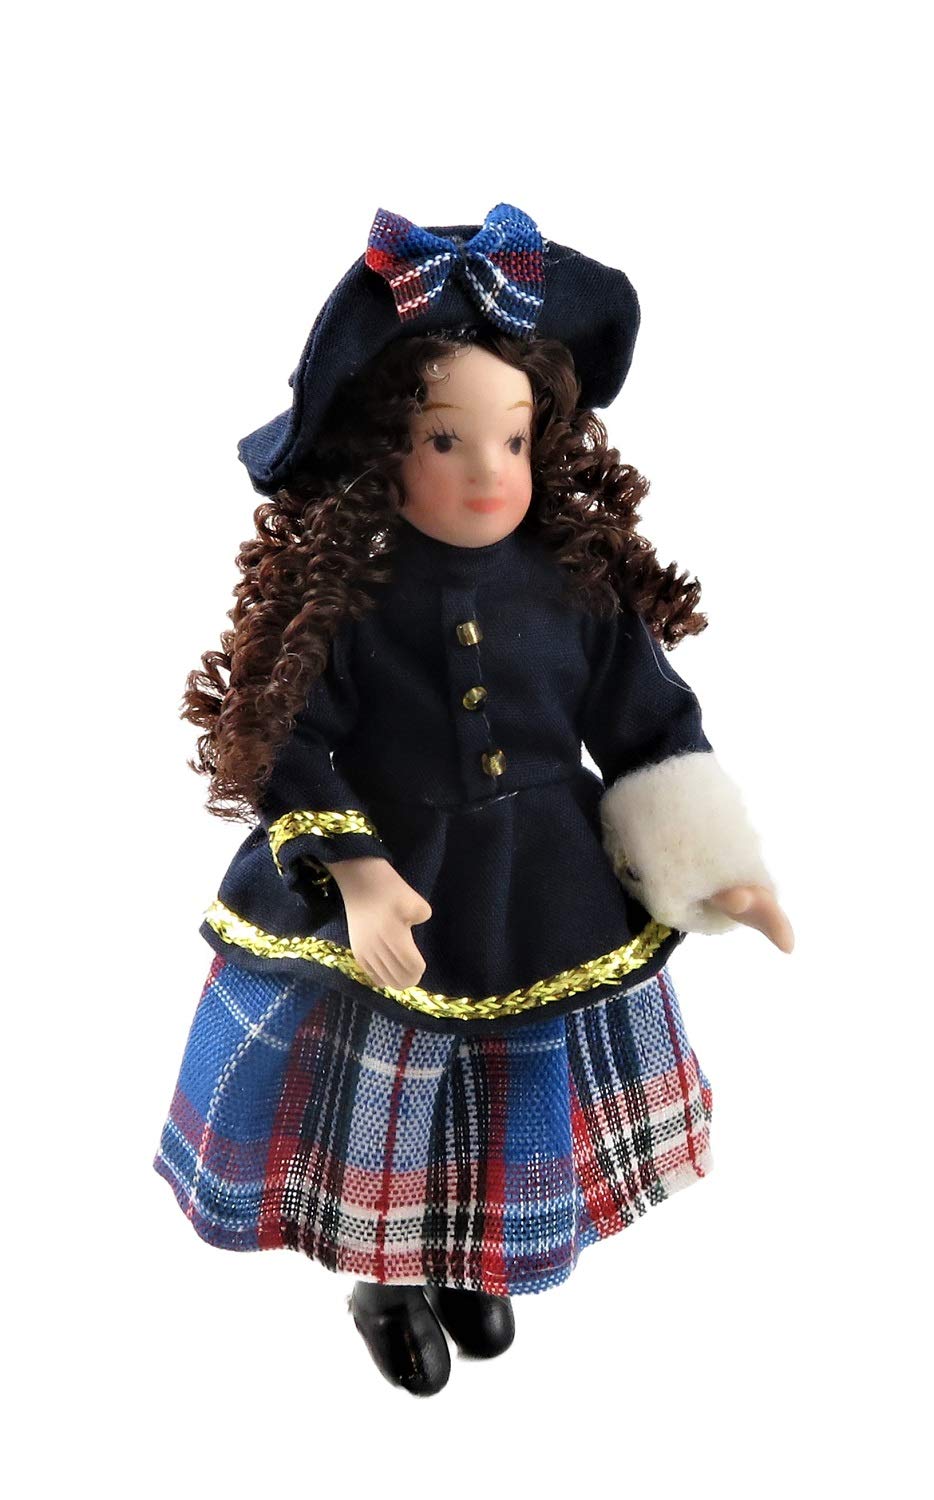 Dolls House Victorian Little Girl in Winter Outfit 1:12 Scale Porcelain People